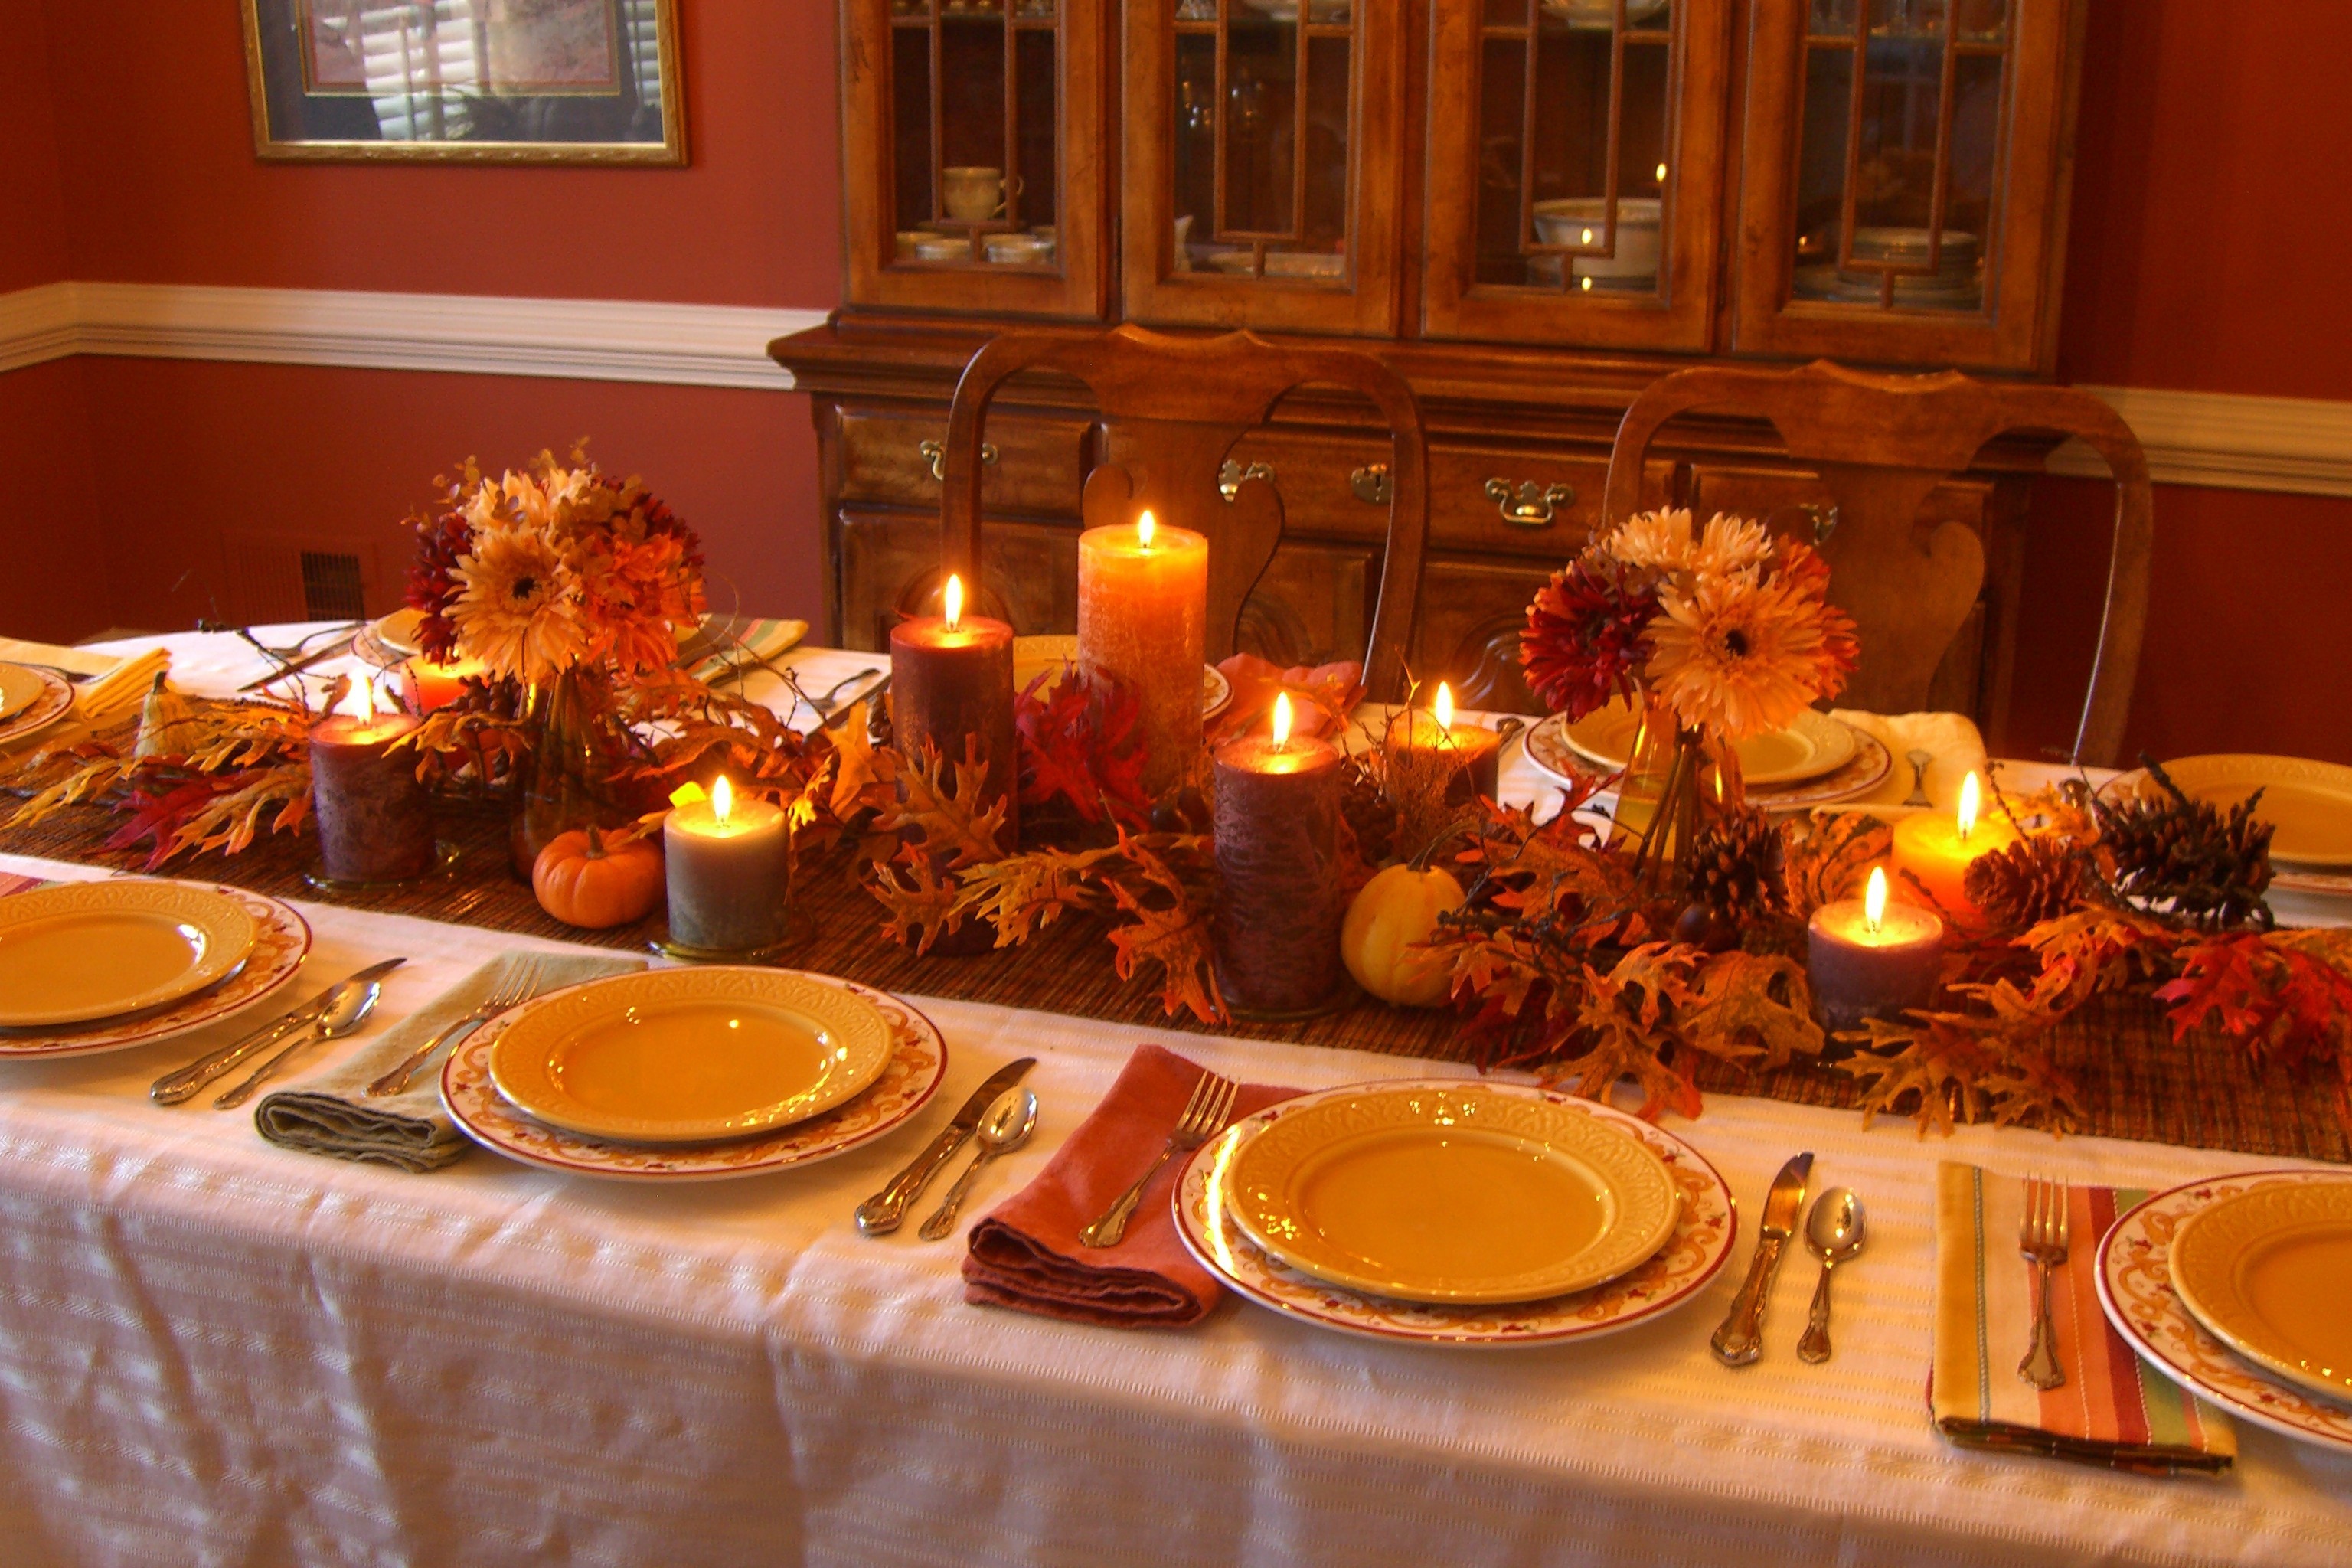 Decorating Table Thanksgiving Printed Pattern - Decorate A Table For Thanksgiving - HD Wallpaper 